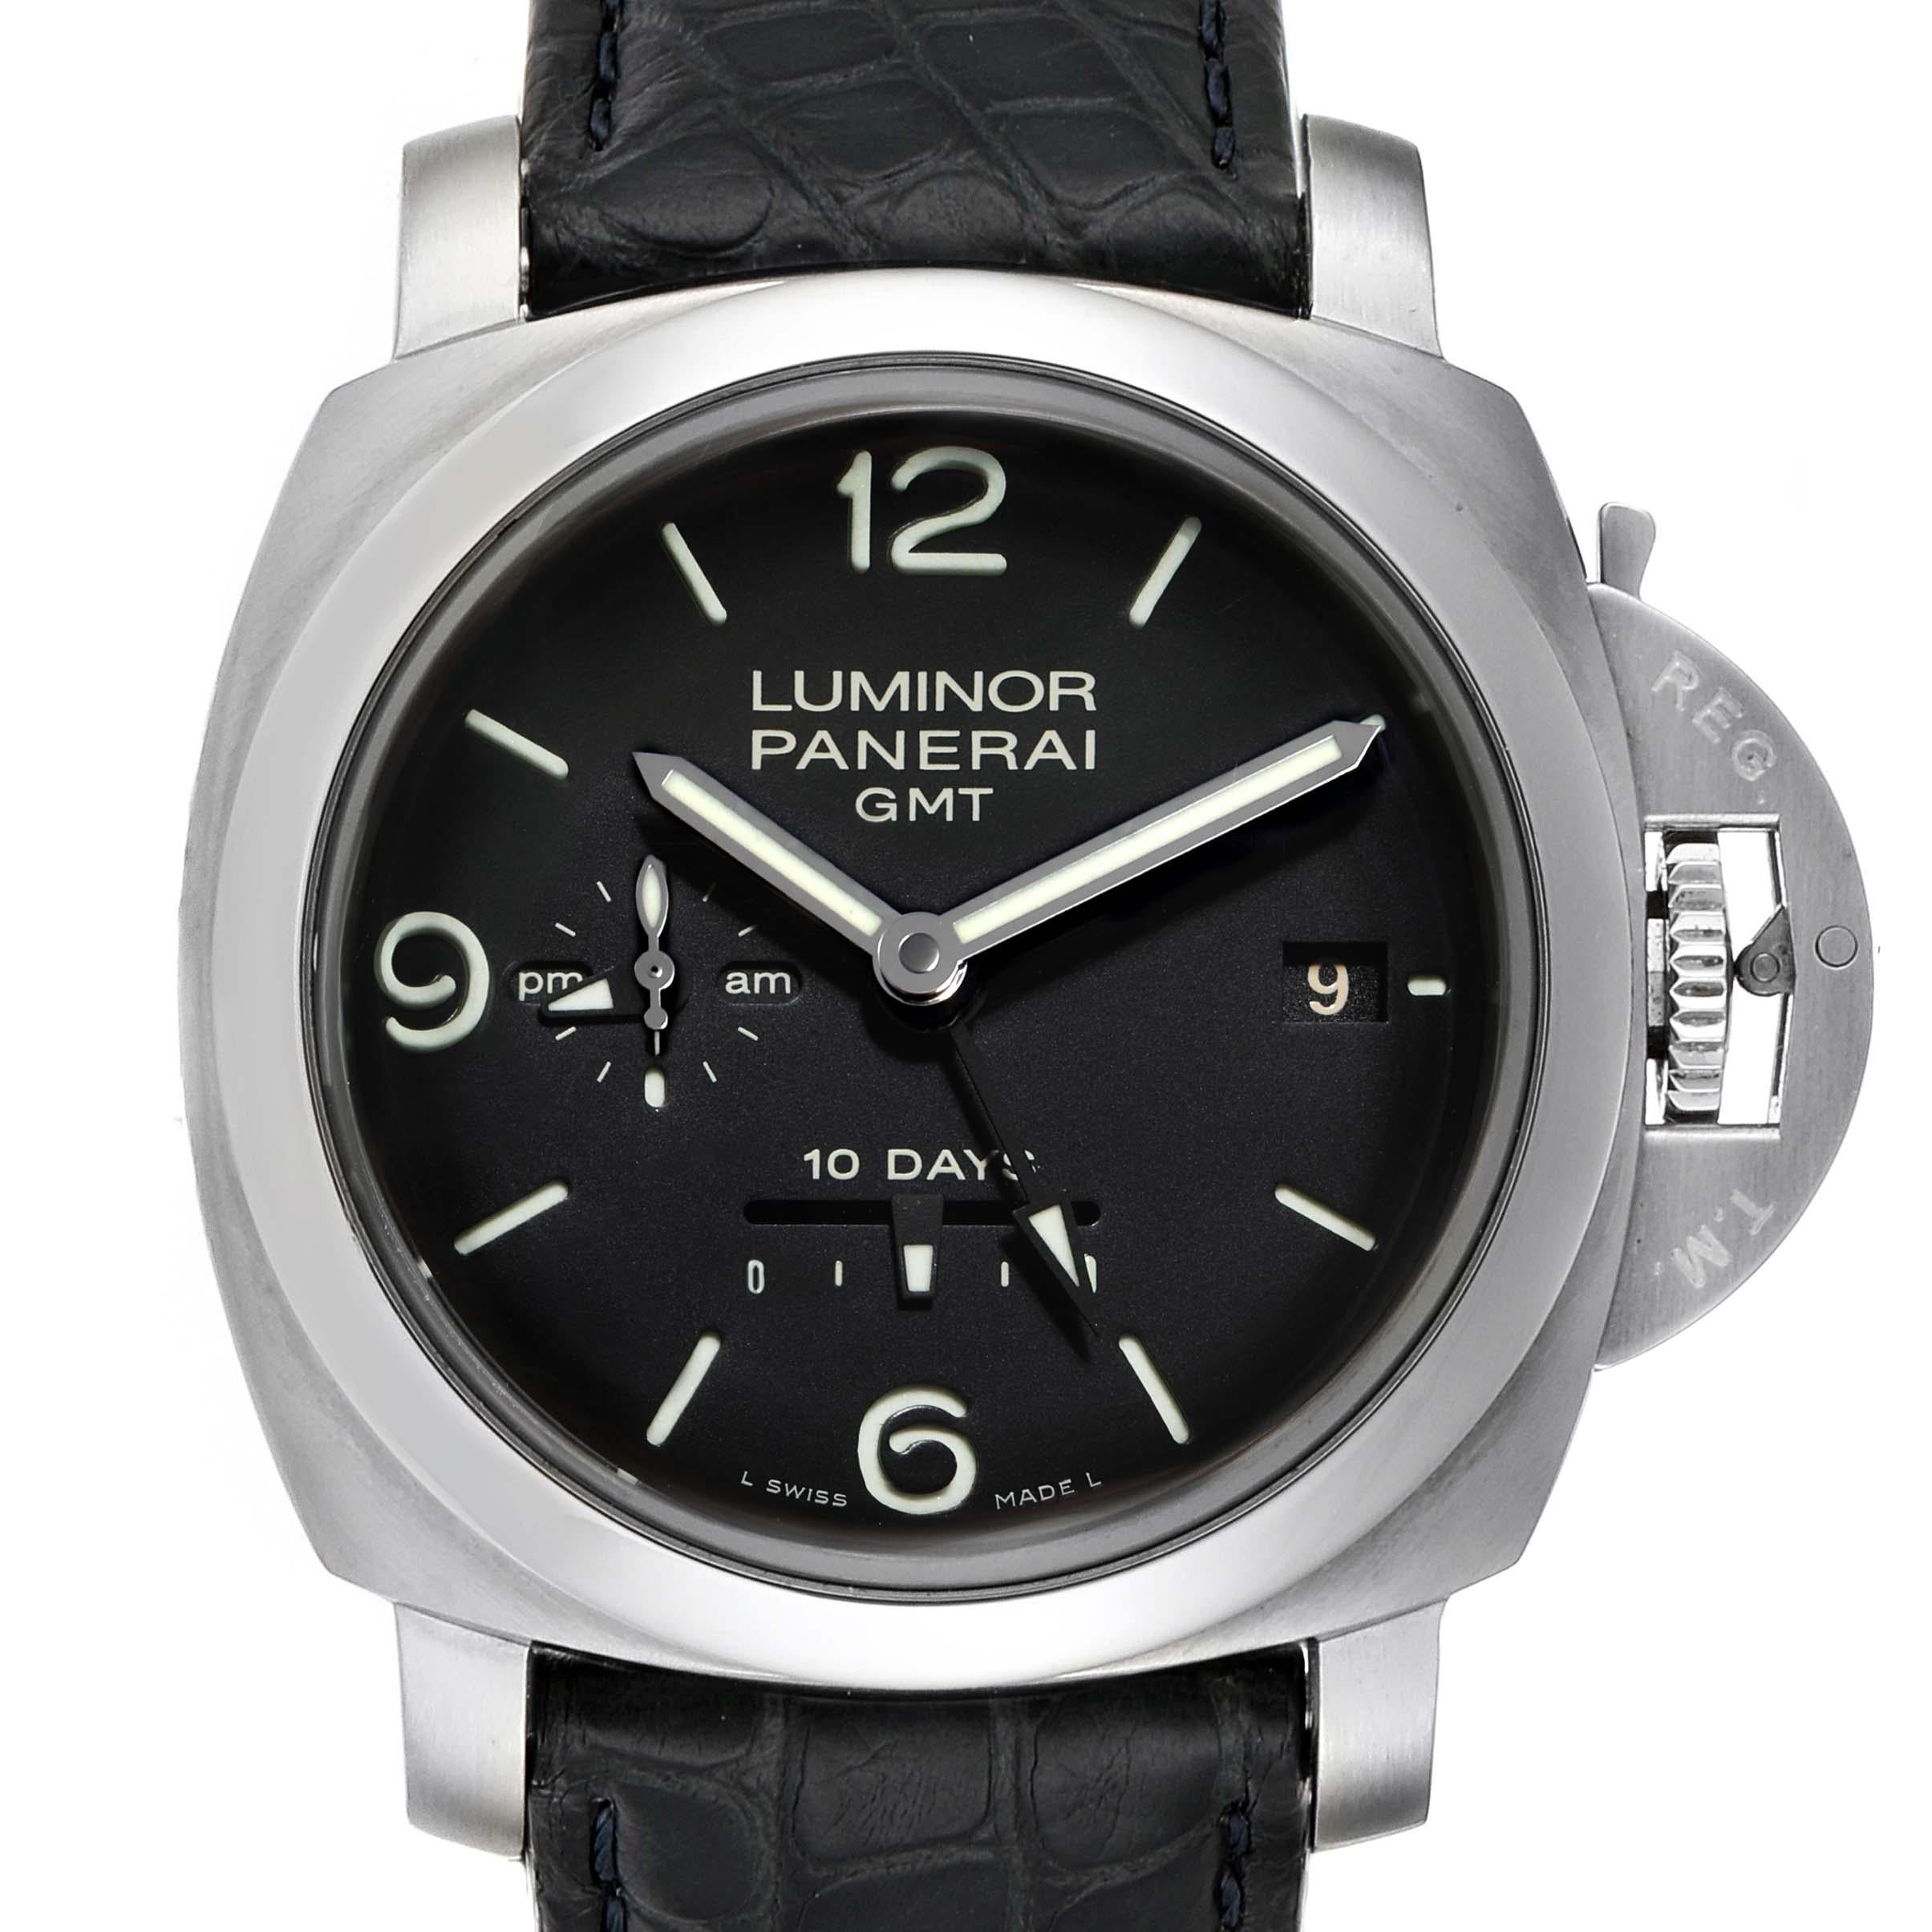 Panerai Luminor Marina 1950 10 Days GMT 44mm Watch PAM00270 Box Papers. Automatic self-winding movement. Two part cushion shaped stainless steel case 44.0 mm in diameter. Panerai patented crown protector. Transparrent case back. Polished stainless